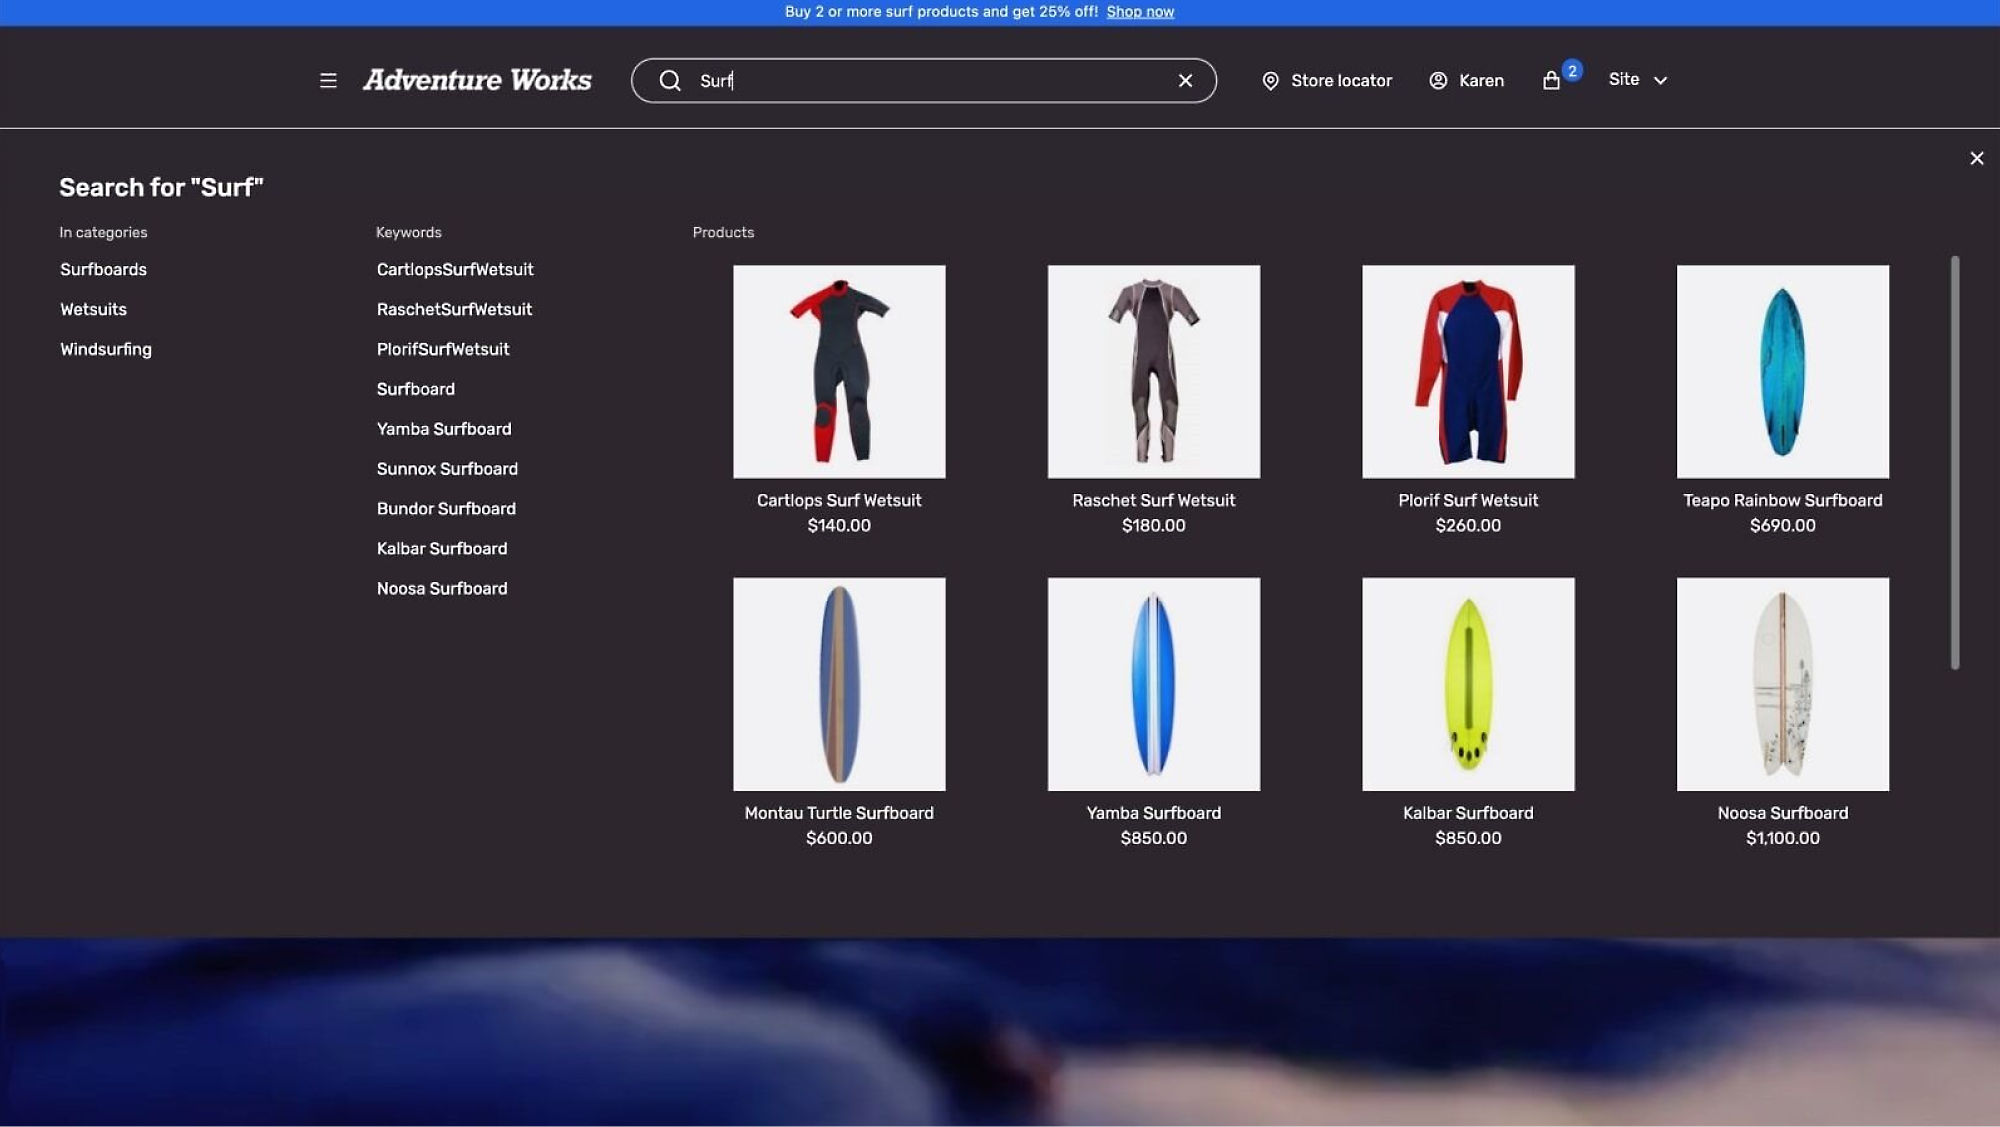 Promotion: Buy 2+ surf products, get 25% off. Products include surfboards and wetsuits. Prices listed.